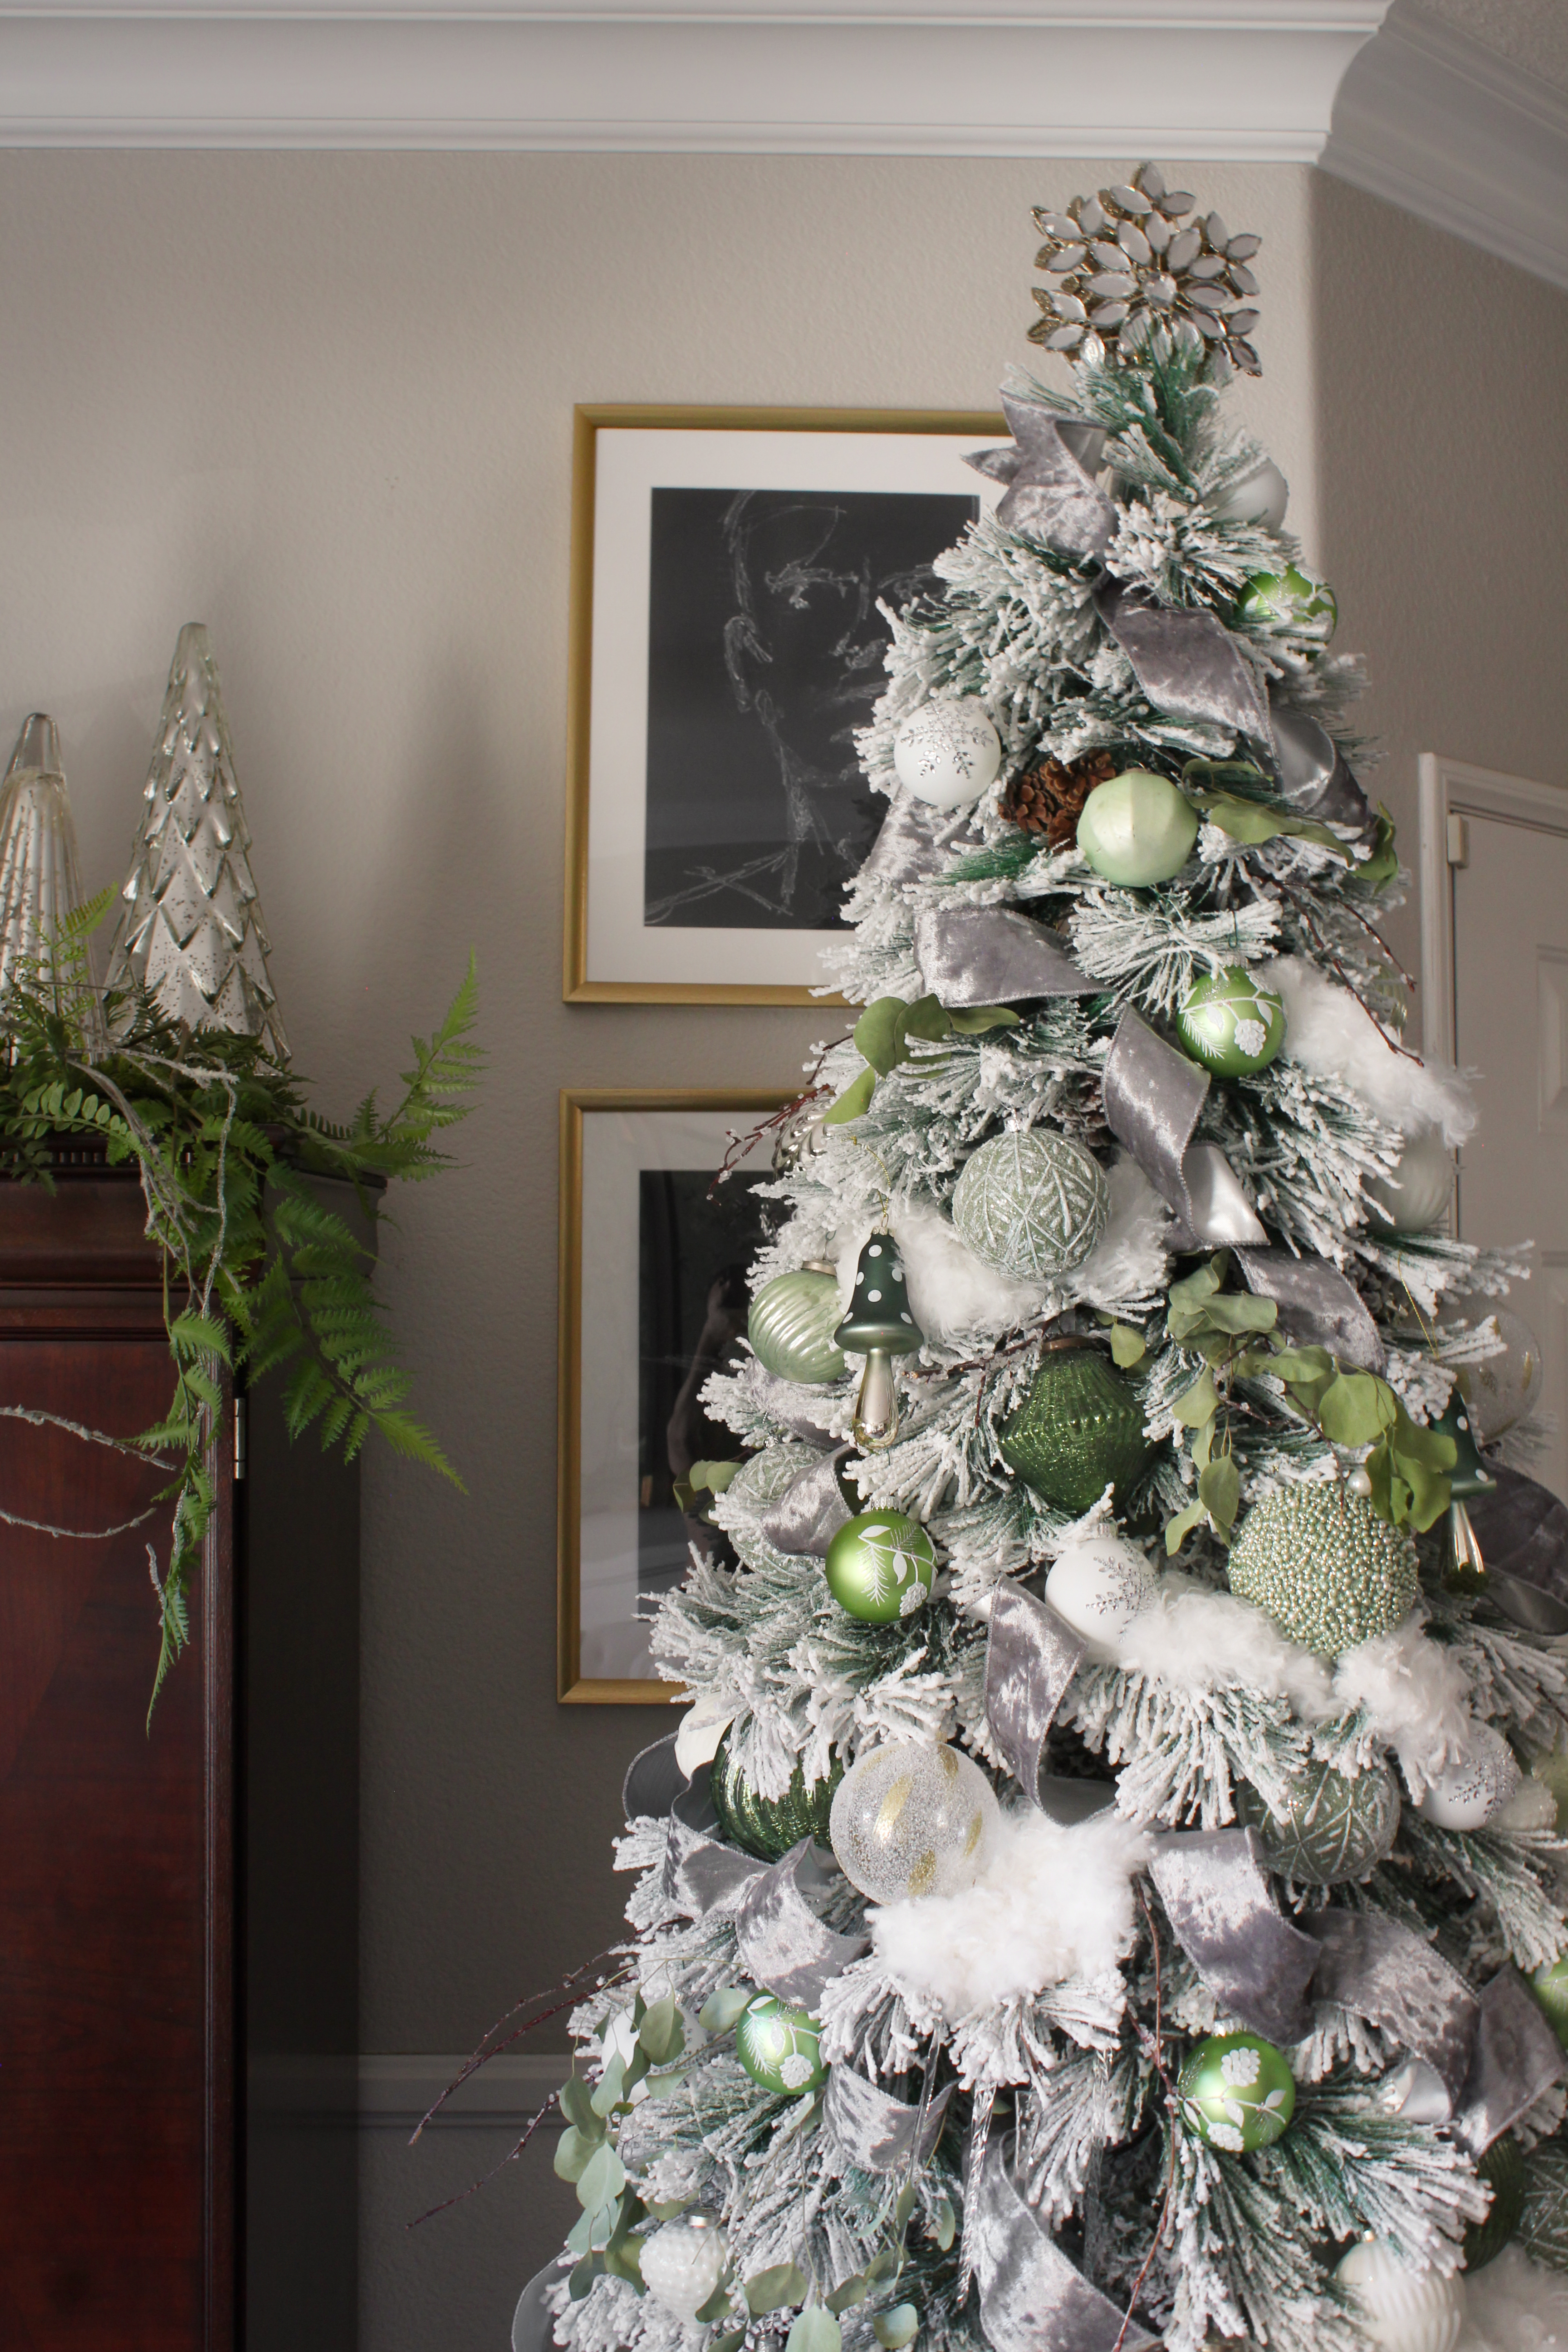 23 Beautiful Christmas Tree Ribbon Ideas to Try This Year